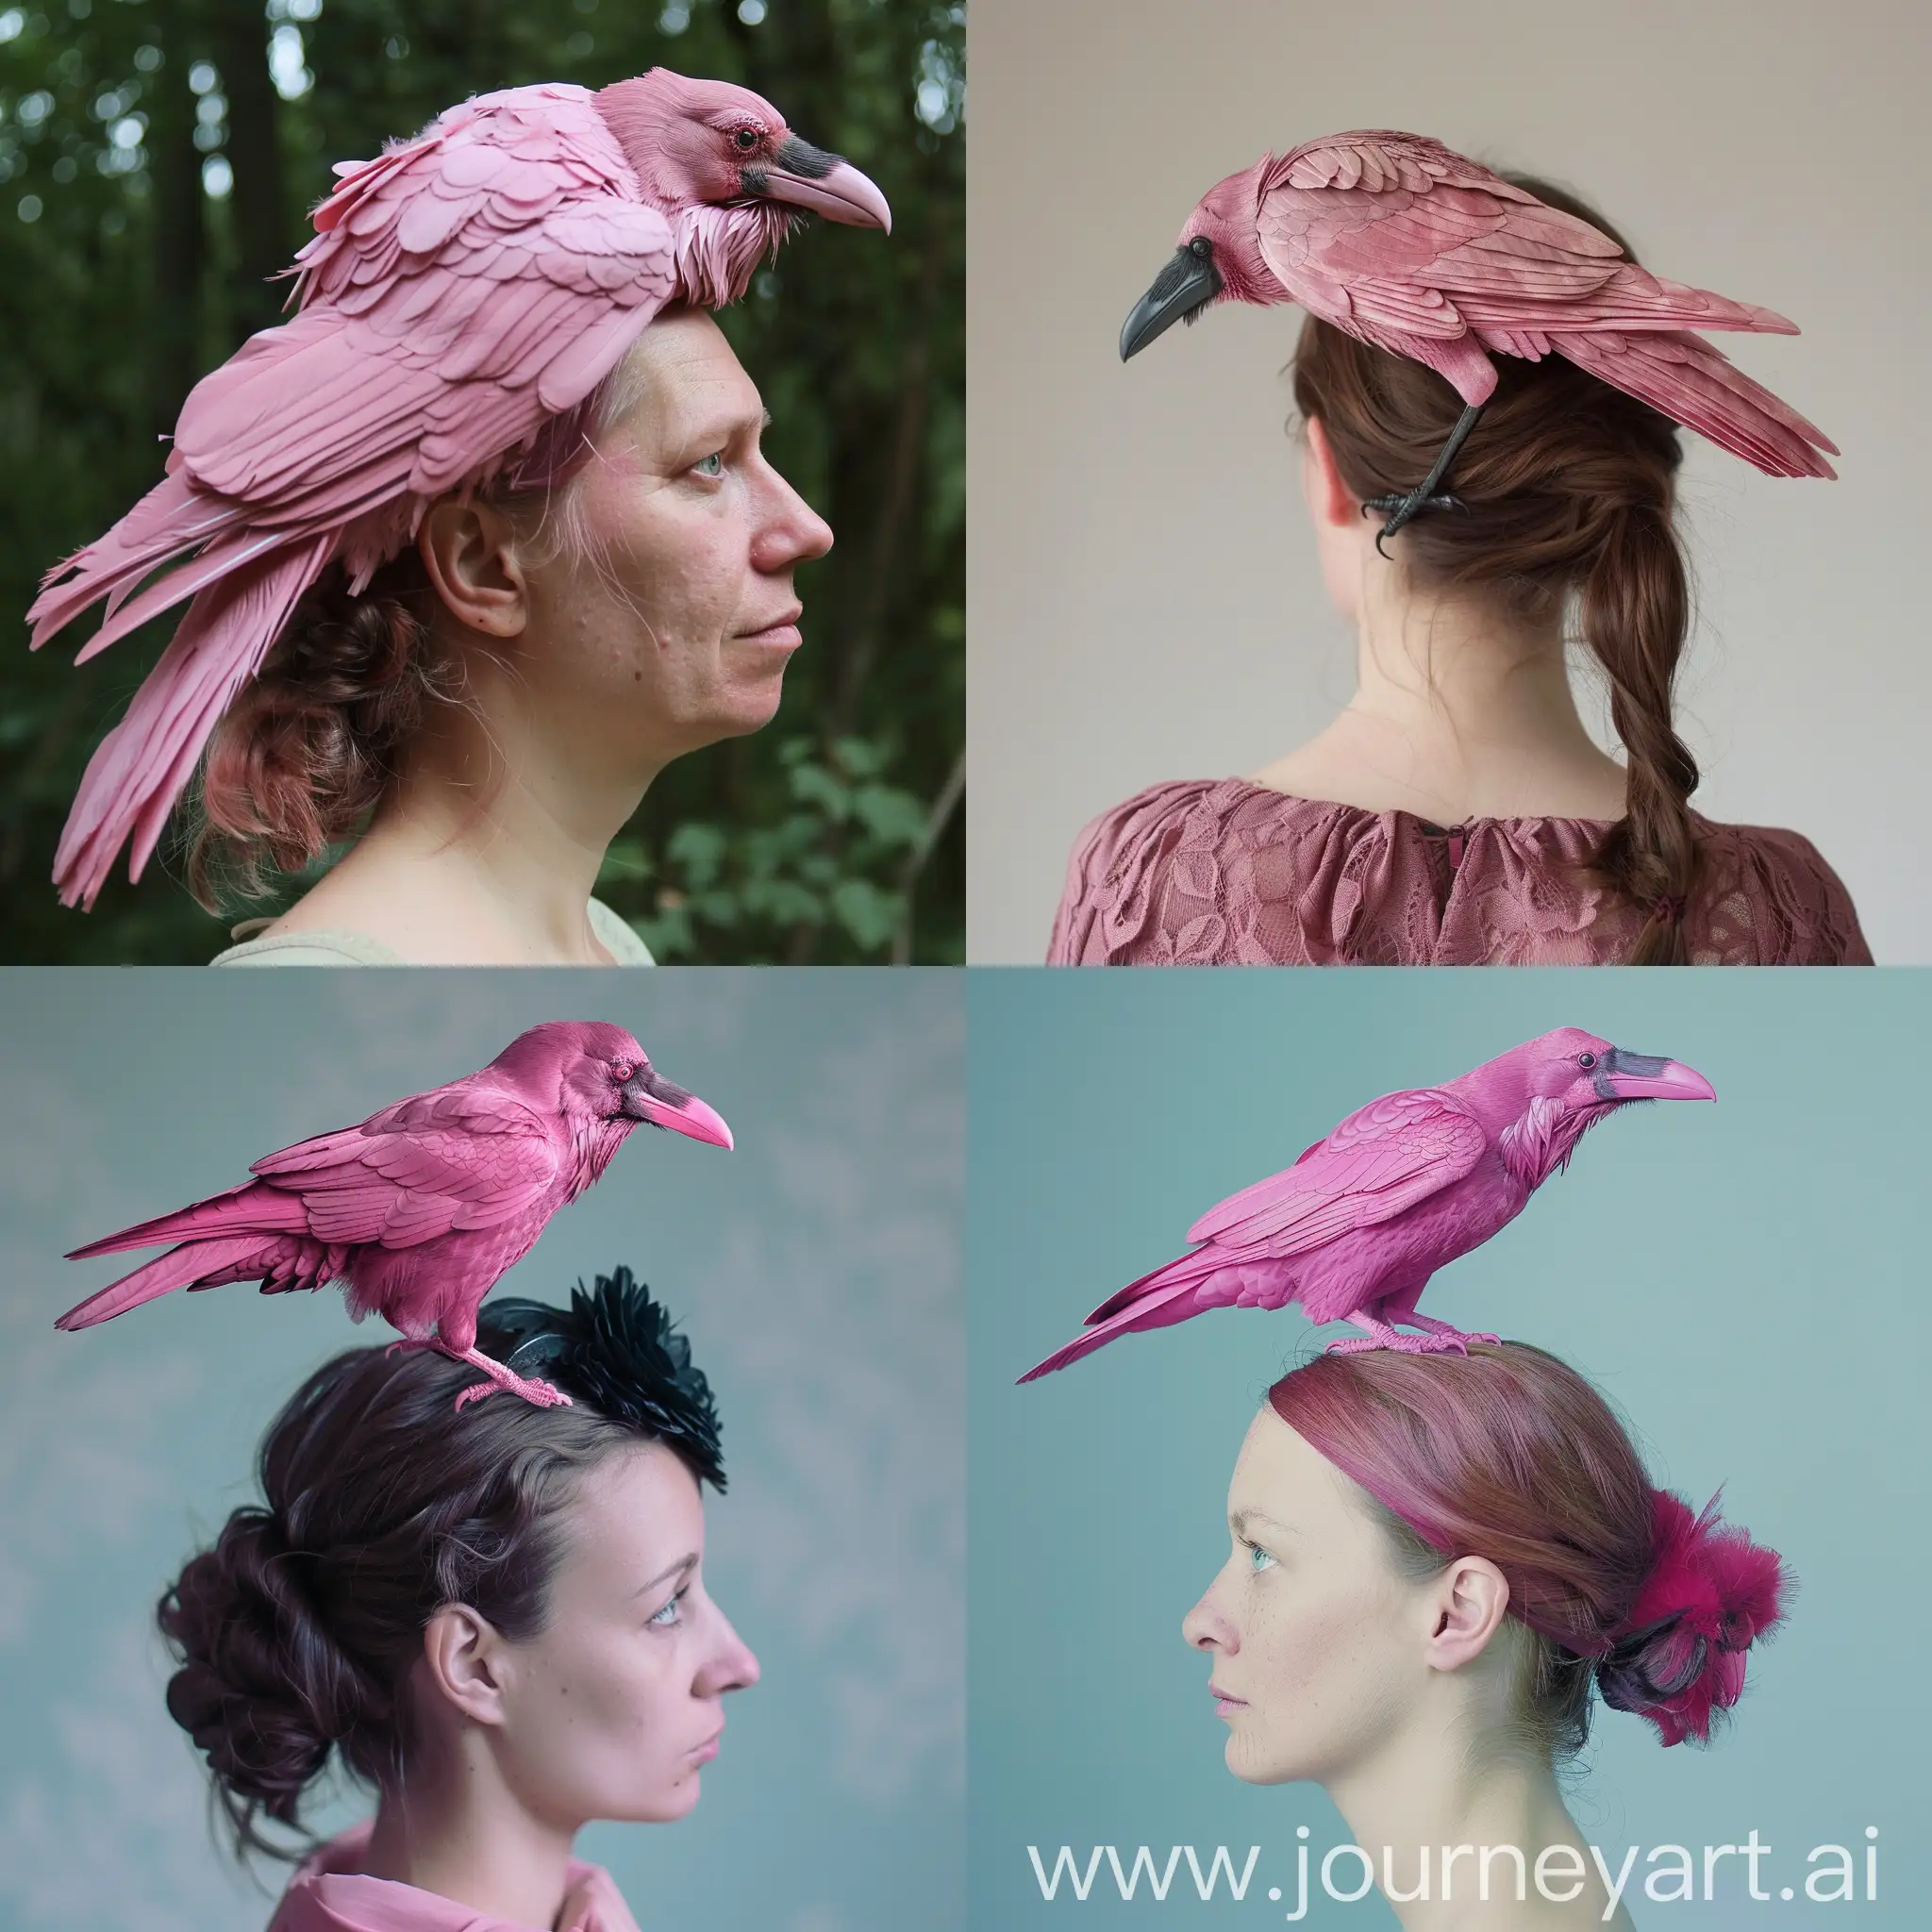 A pink raven on a woman's head